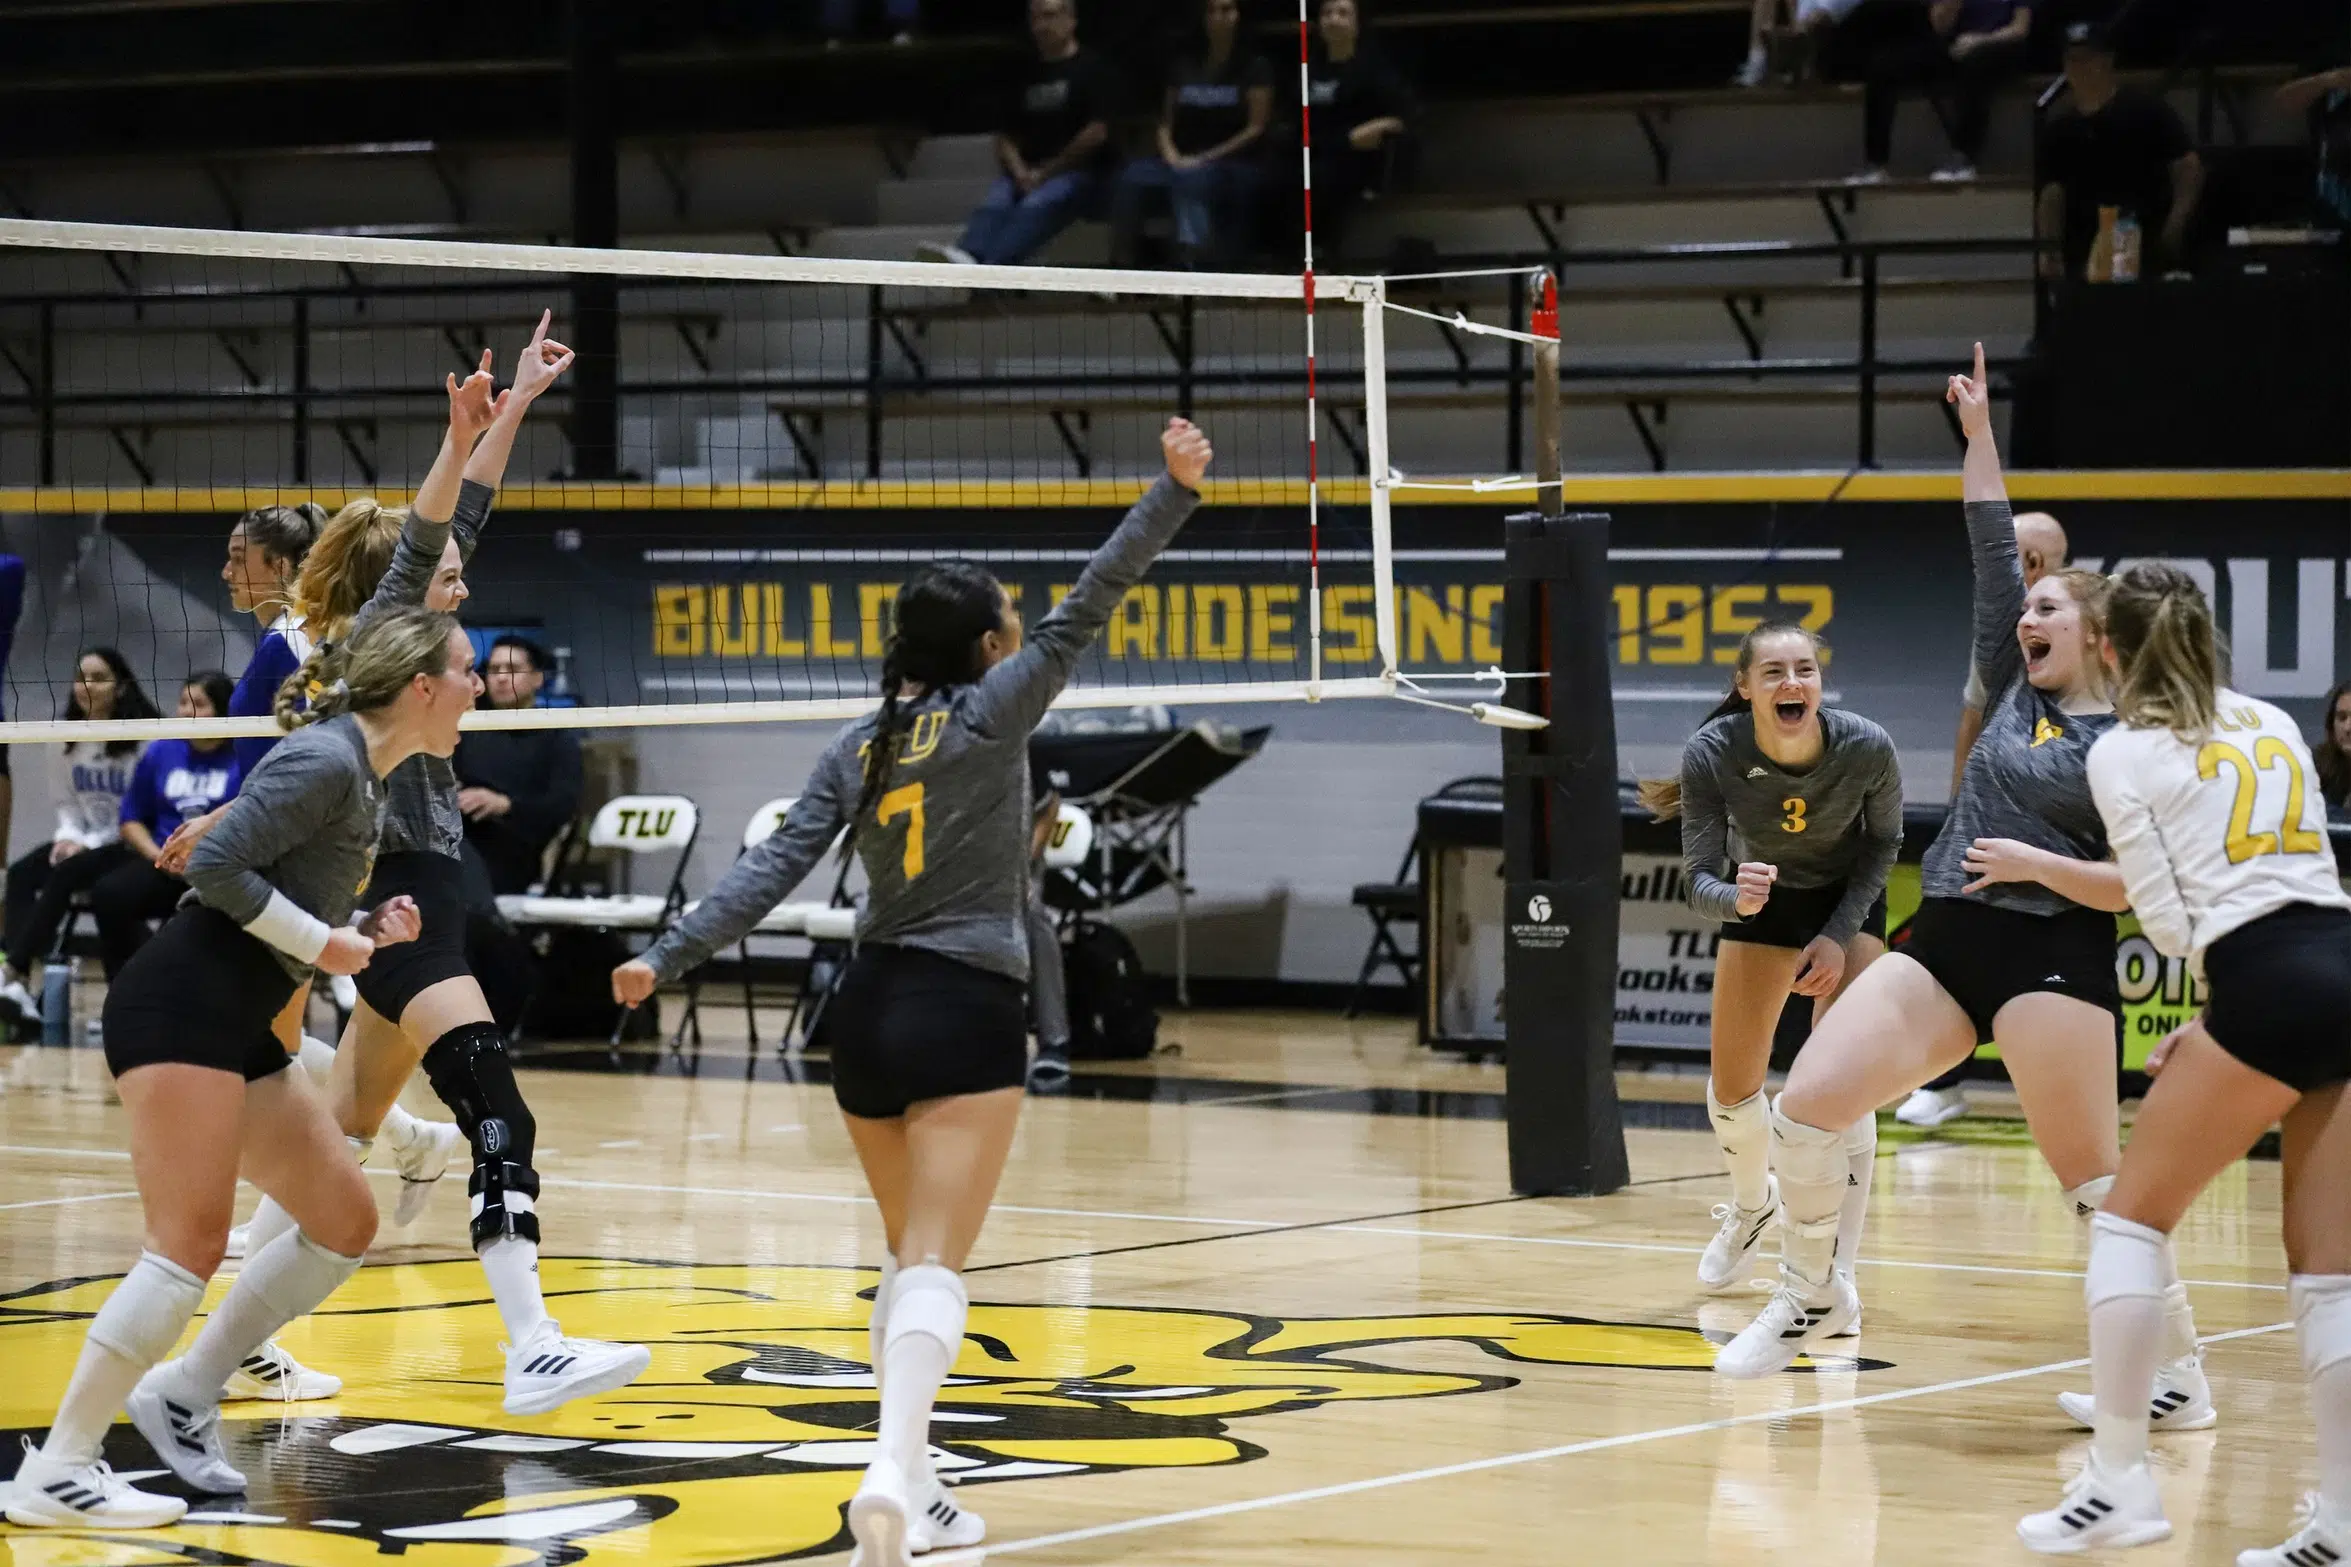 VOLLEYBALL -- TLU Volleyball sweeps OLLU as Hot Start Continues